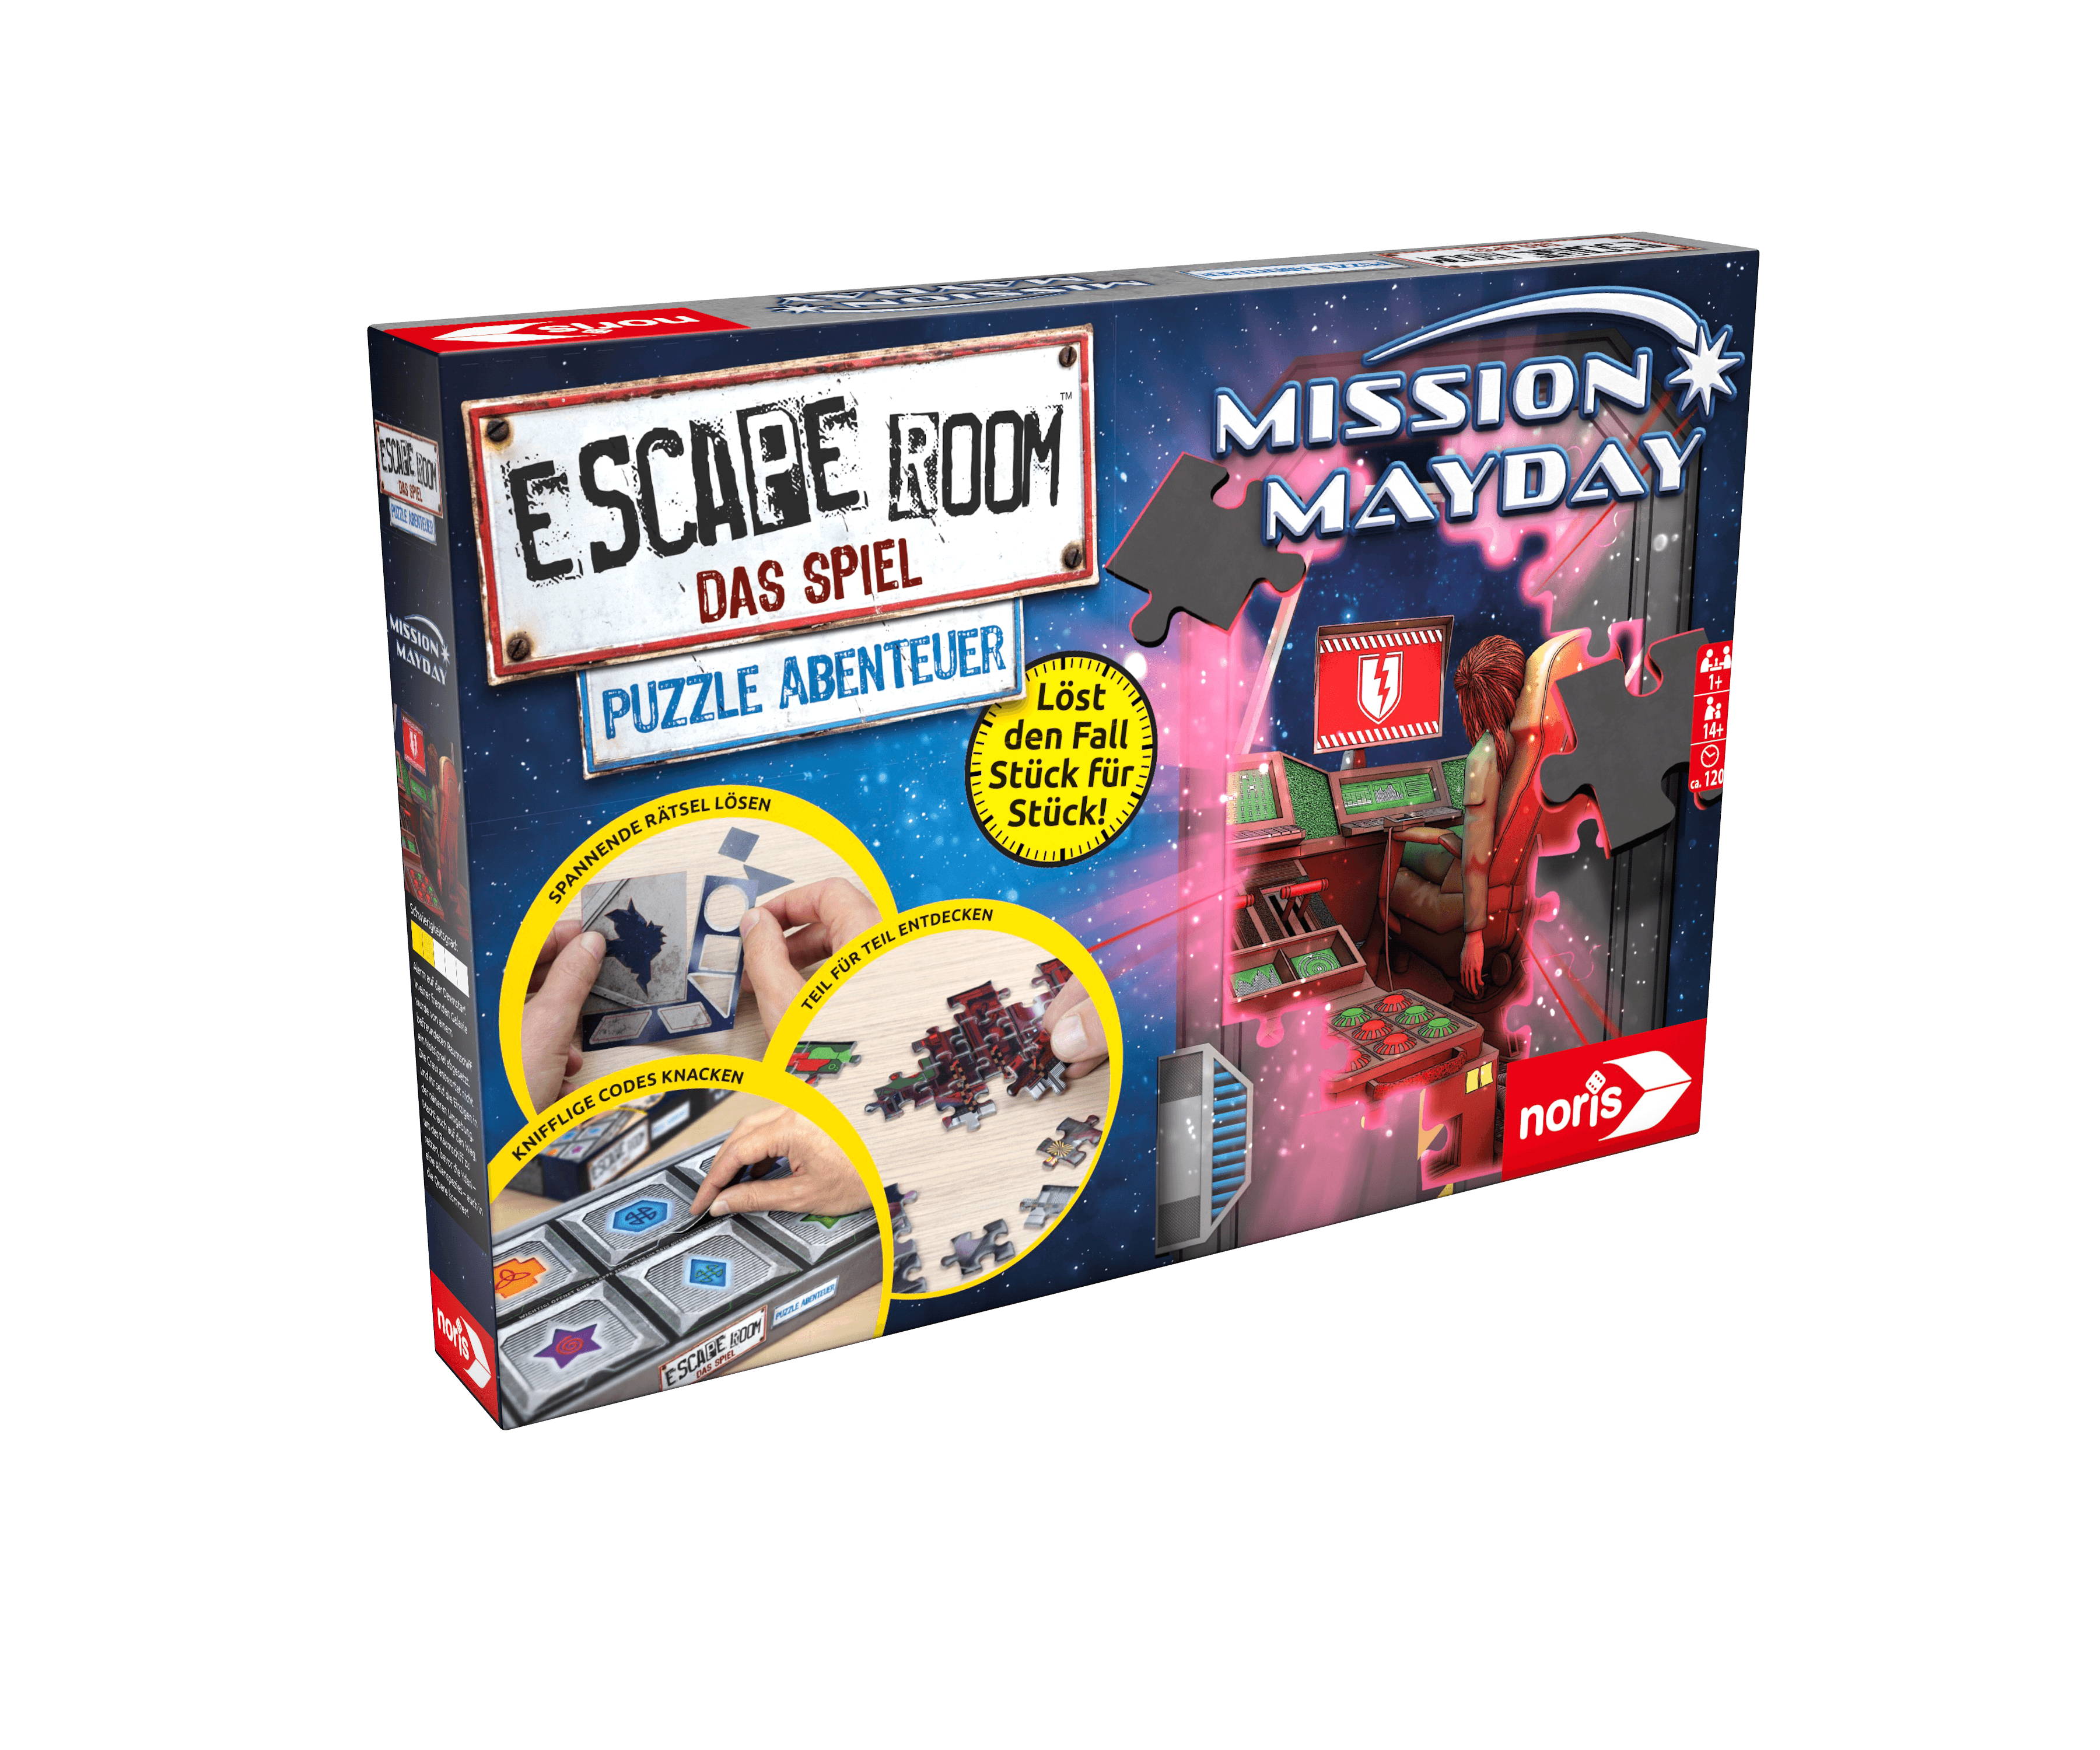 Puzzle Abenteuer - Mission Mayday